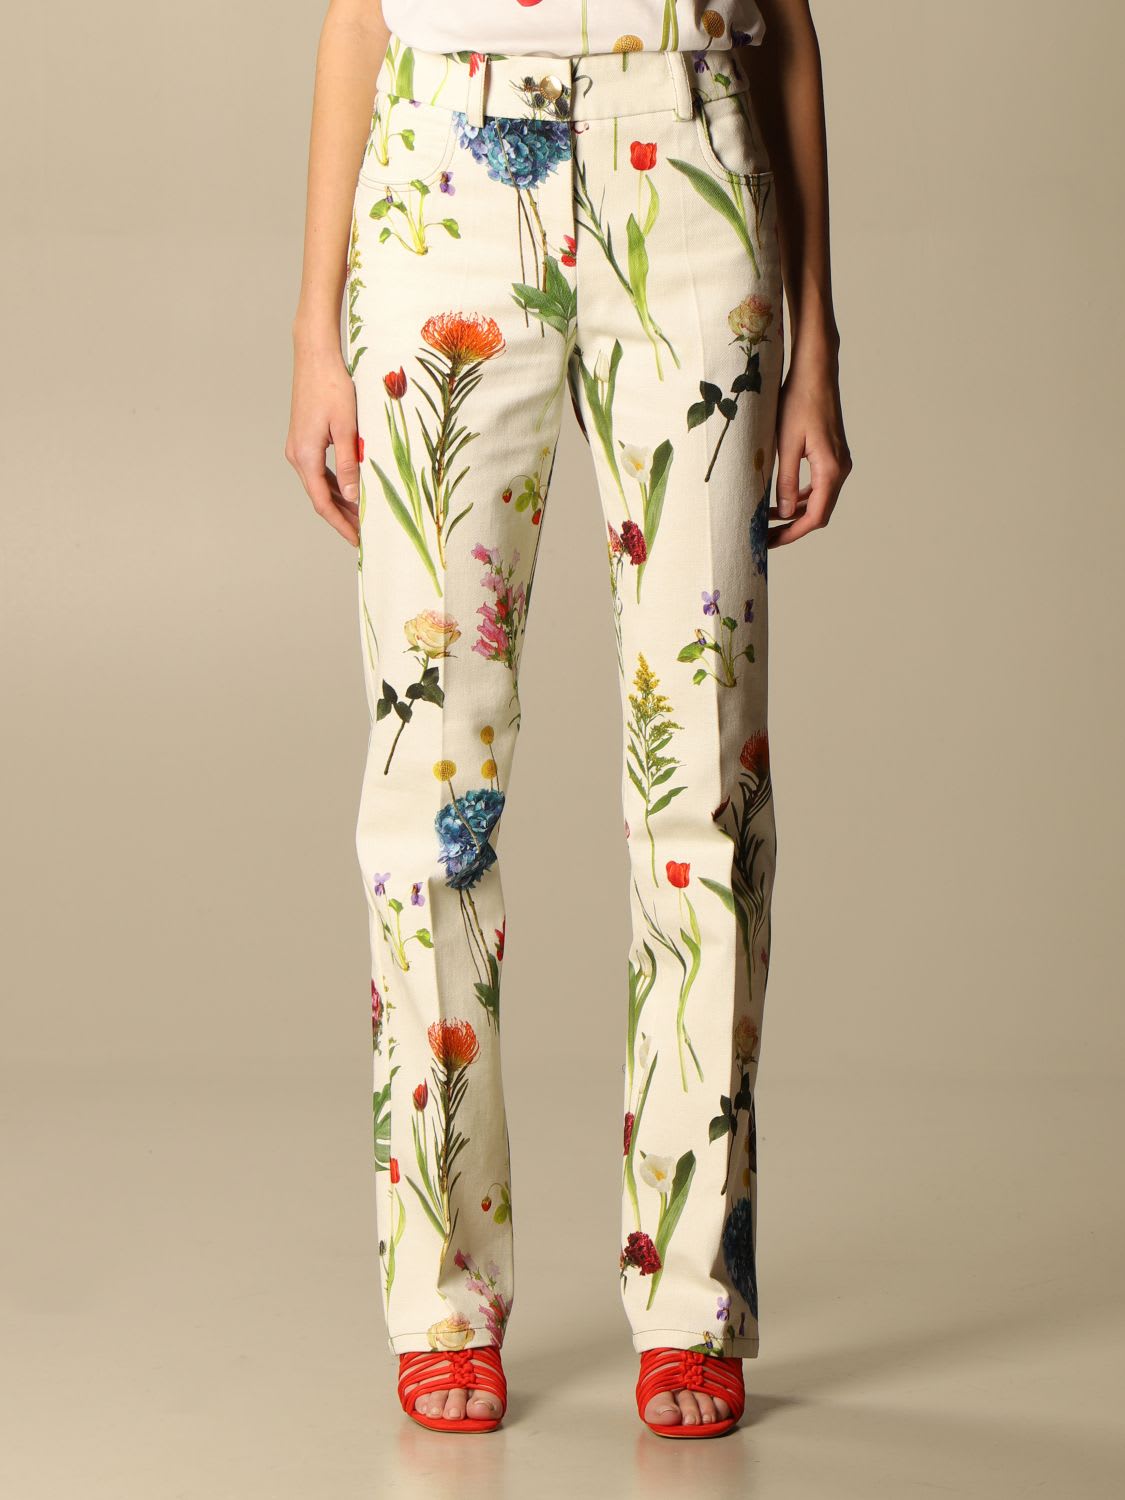 Boutique Moschino Pants Drill Boutique Moschino Trousers In Botanical Patterned Cotton